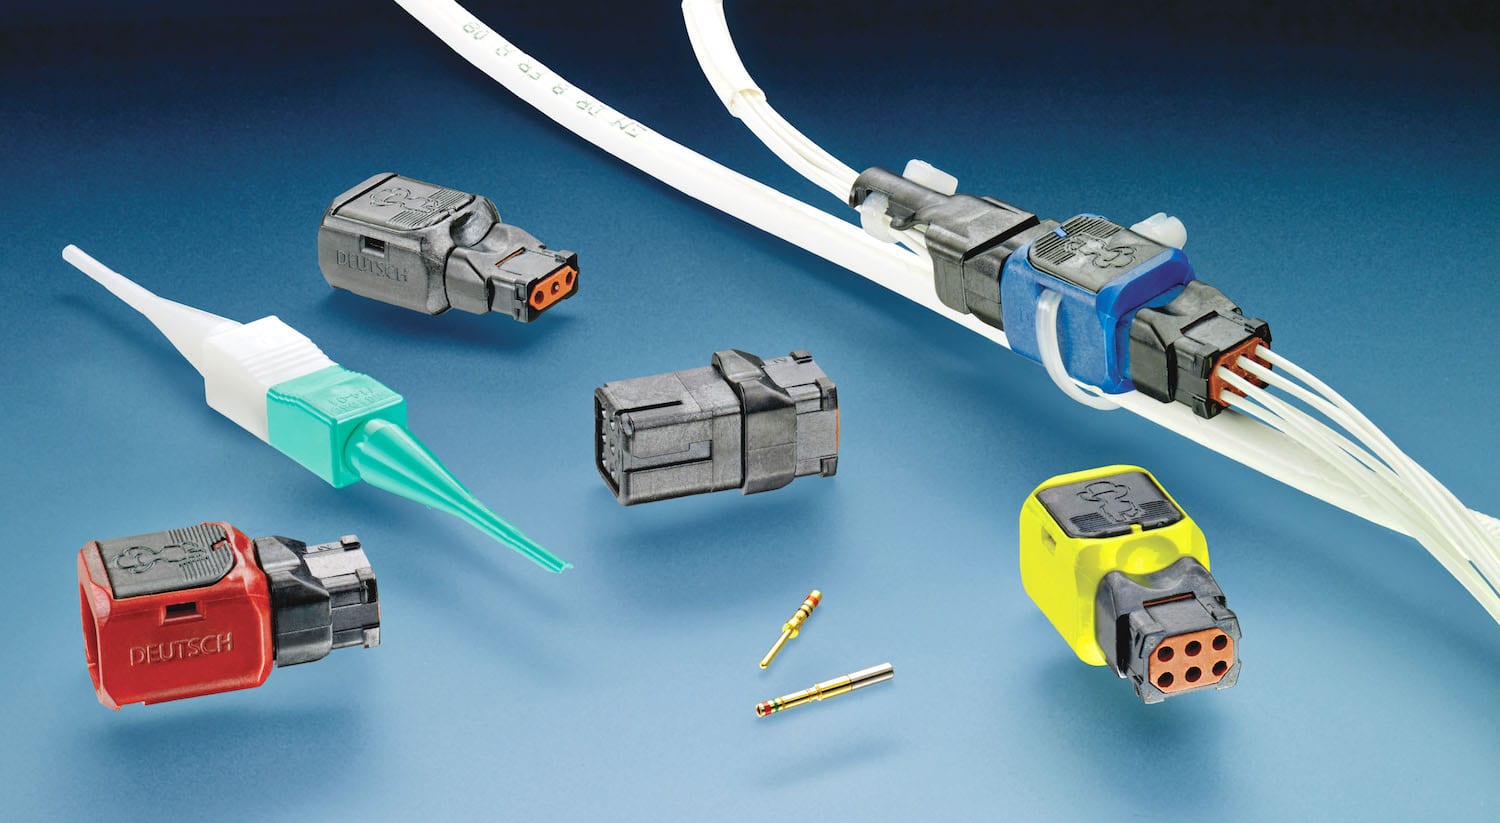 Interstate Connecting Components offers TE Connectivity’s DEUTSCH 369 Series connectors.